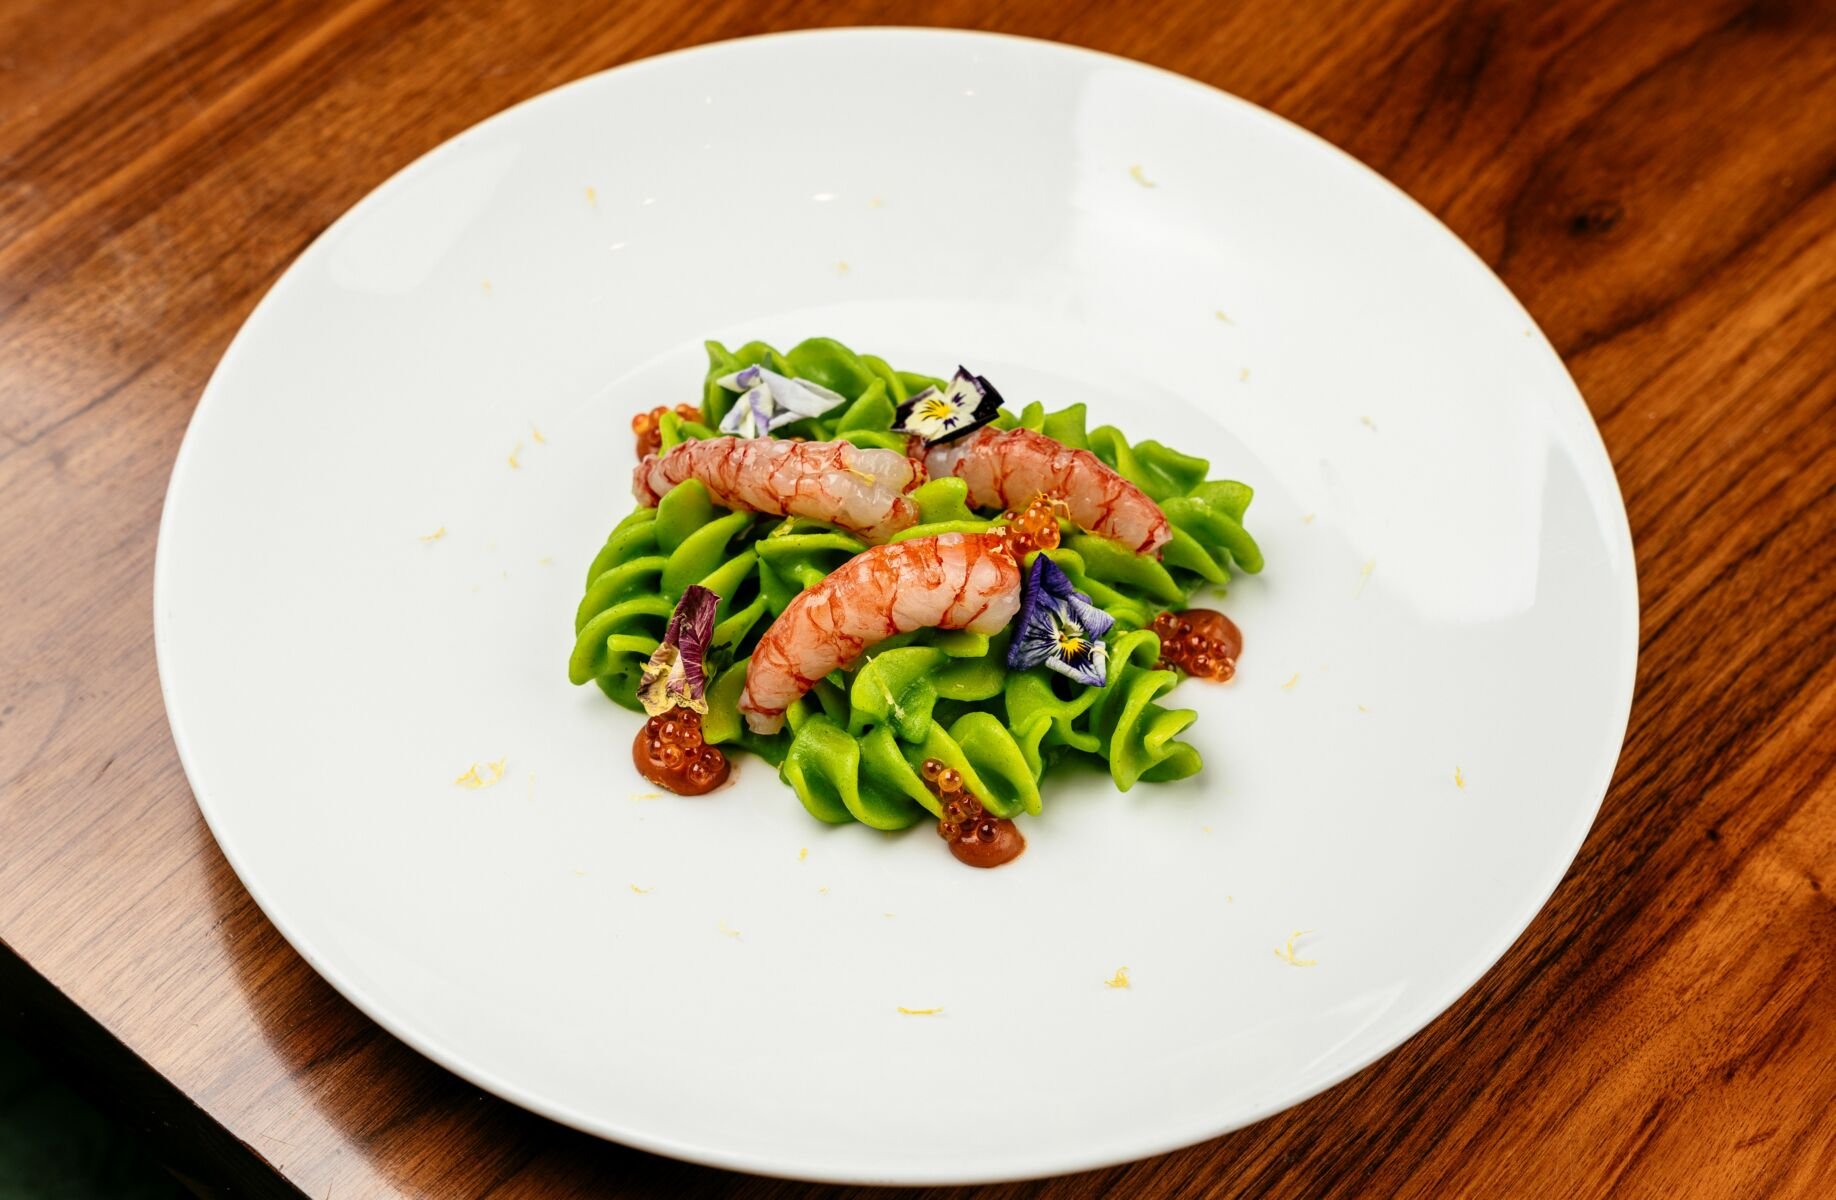 A plate of green pasta with red shrimps. It's Mazzara Fusilli at Rossini's Bangkok.